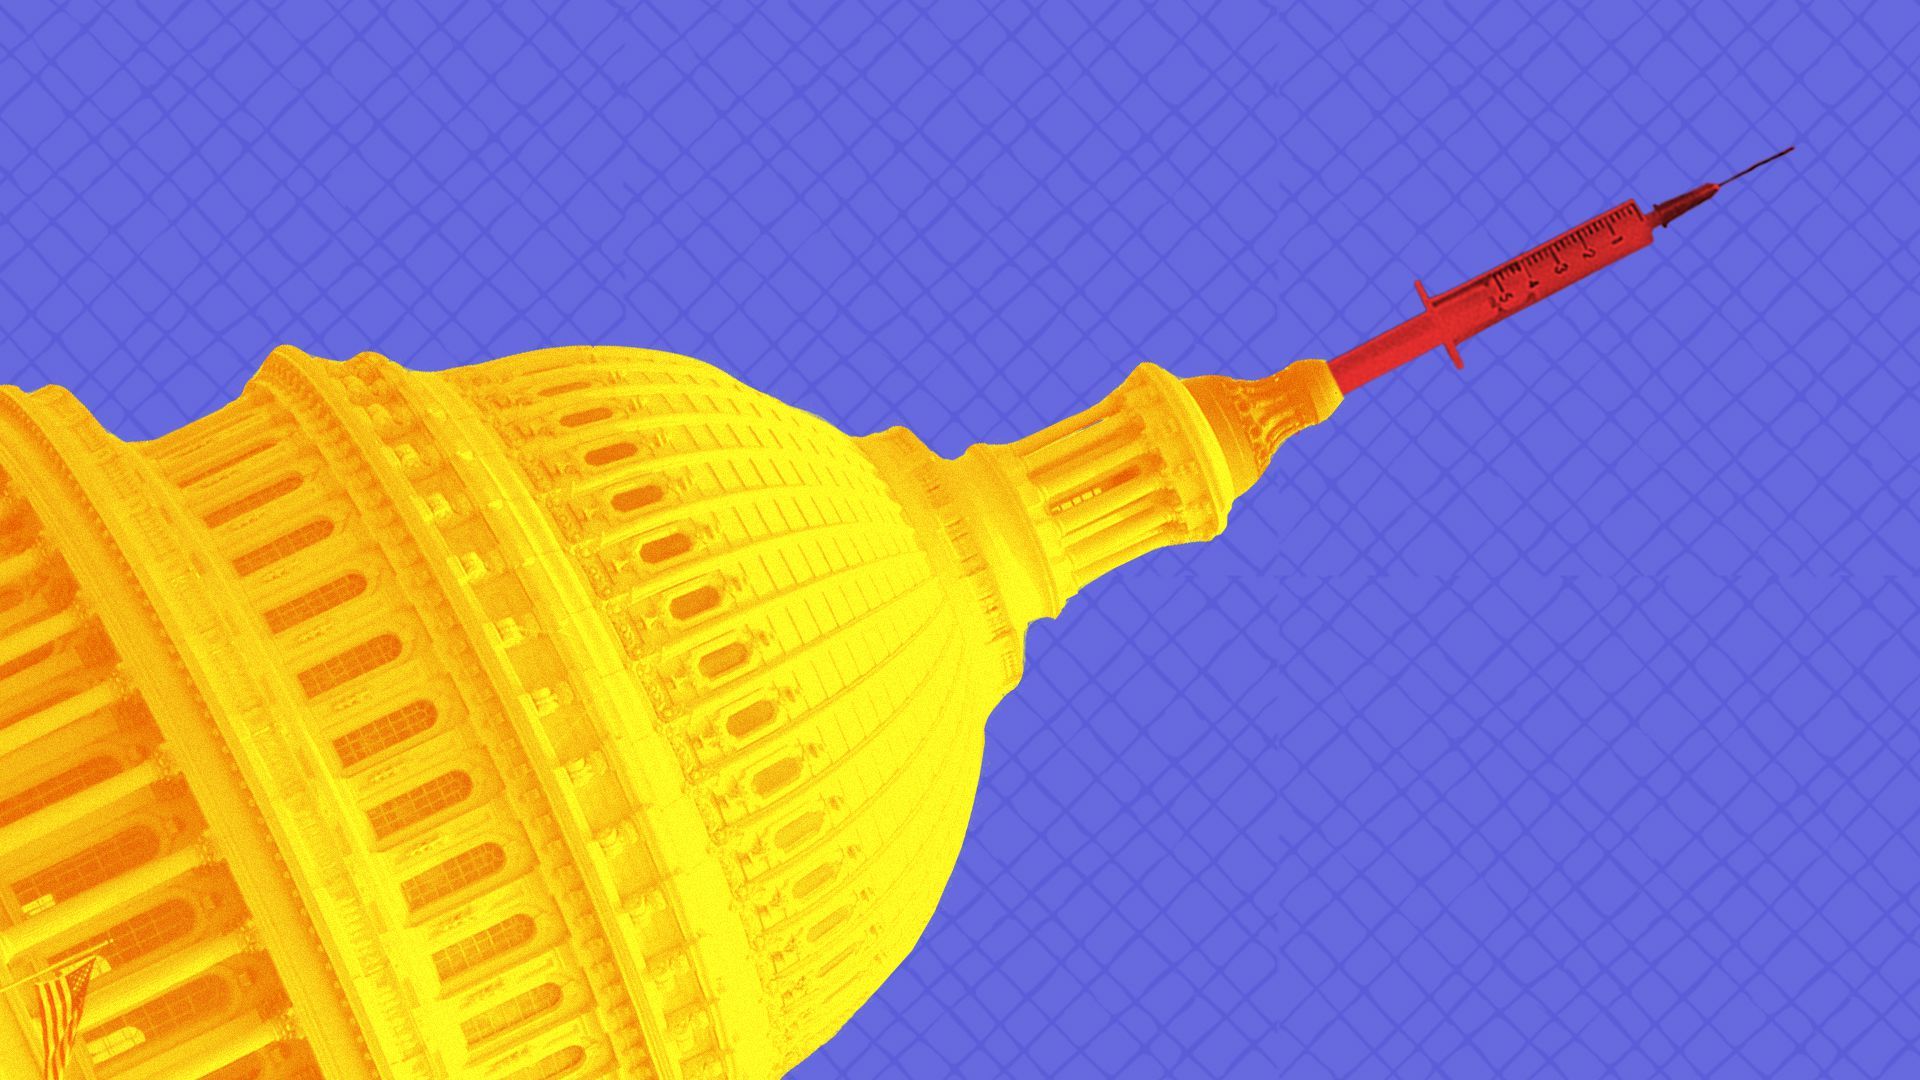 Illustration of the U.S. Capitol building with a syringe on top.